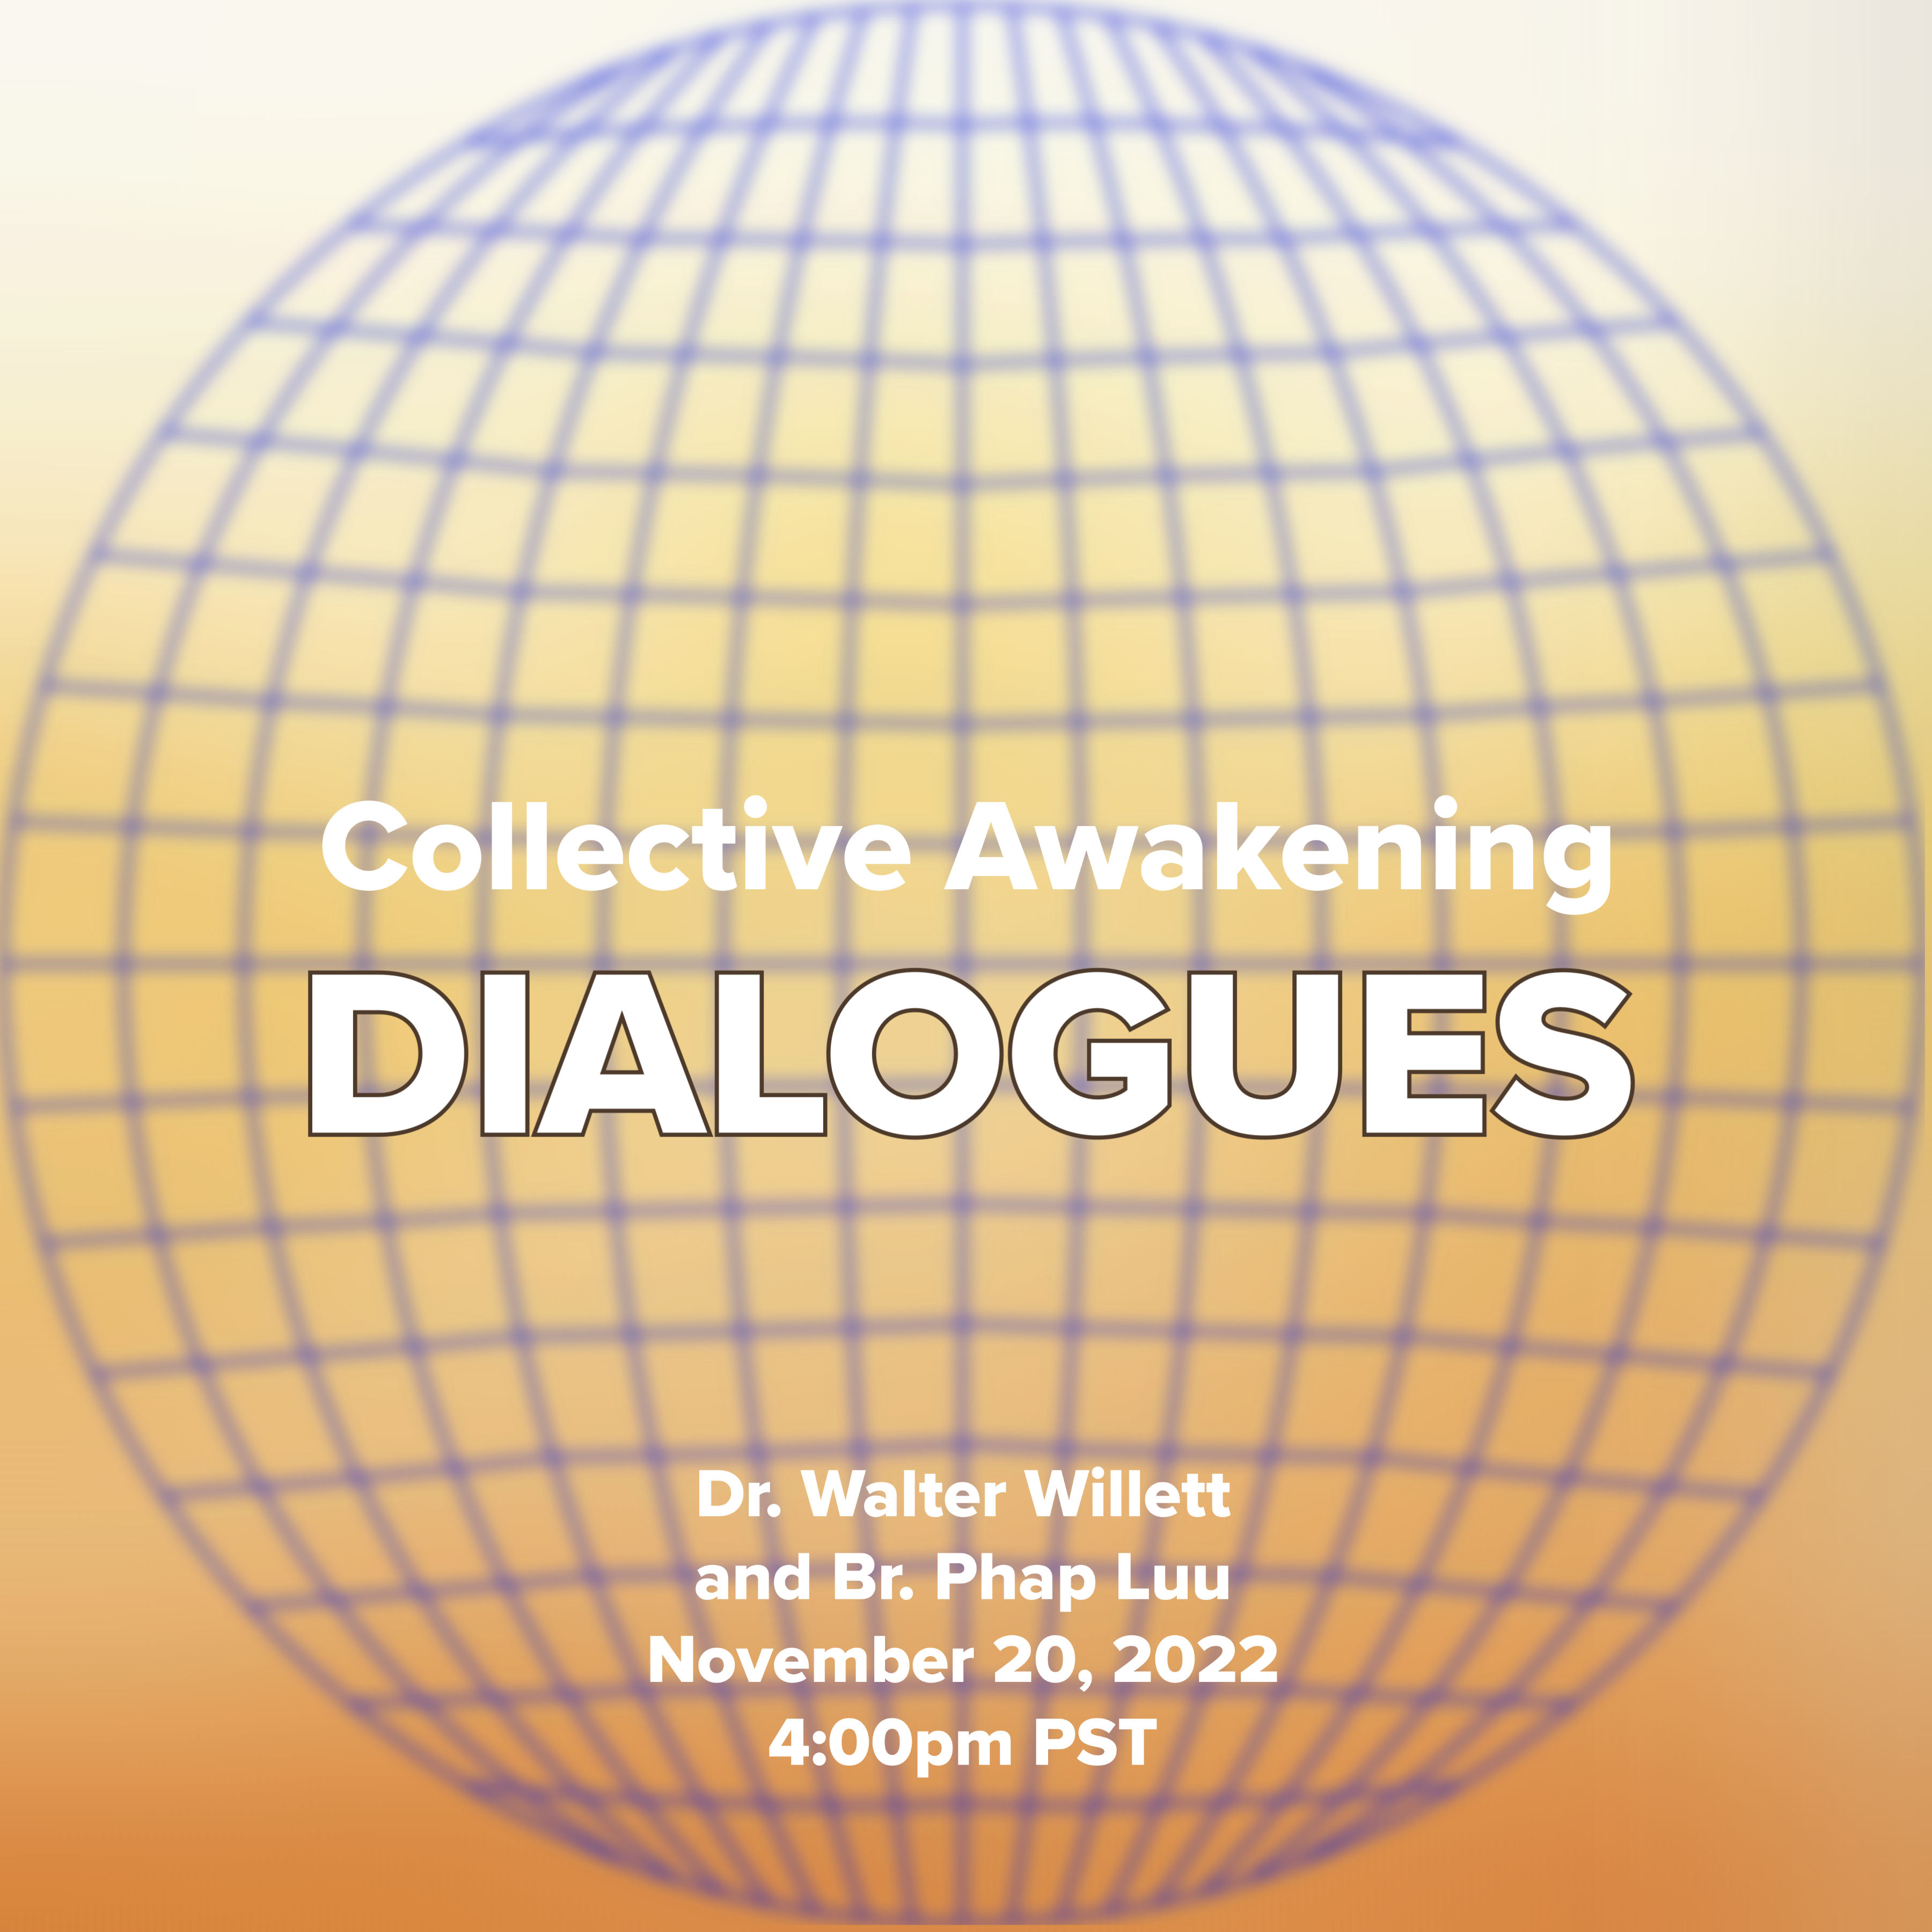 Dialogue with Dr. Walter Willett of Harvard TH Chan School of Public Health